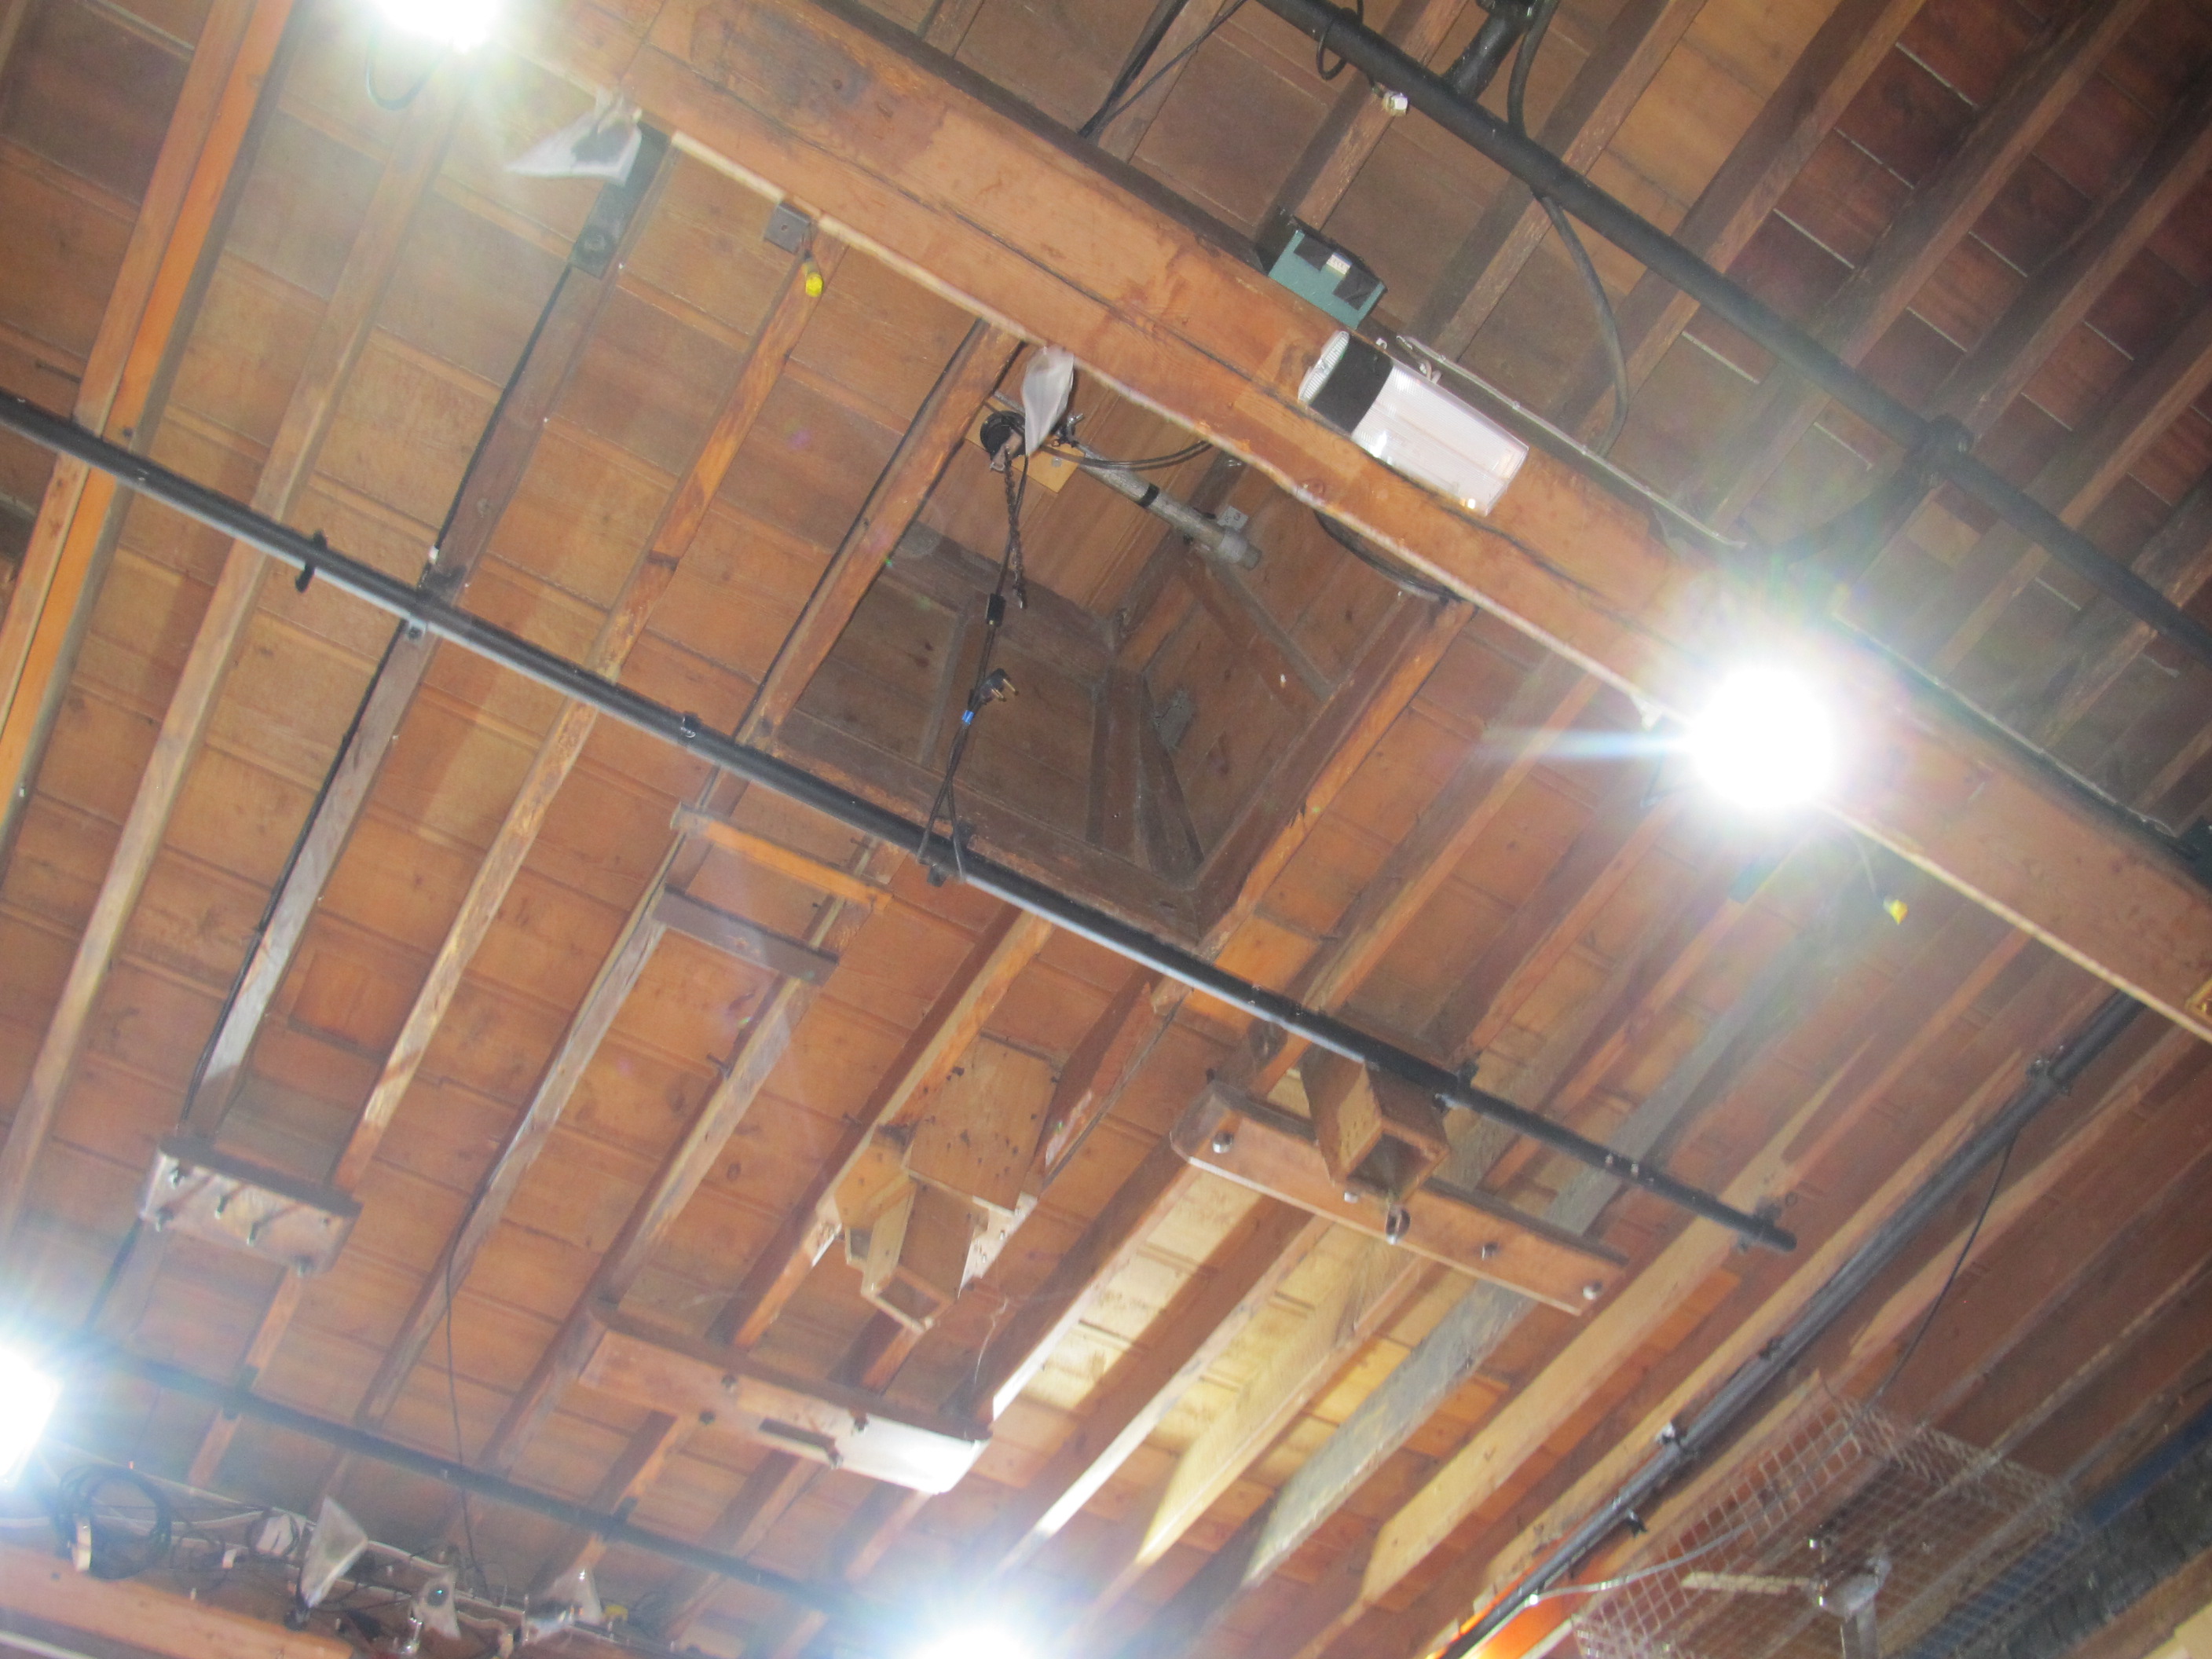 The wooden ceiling of The Watermill Theatres auditorium.